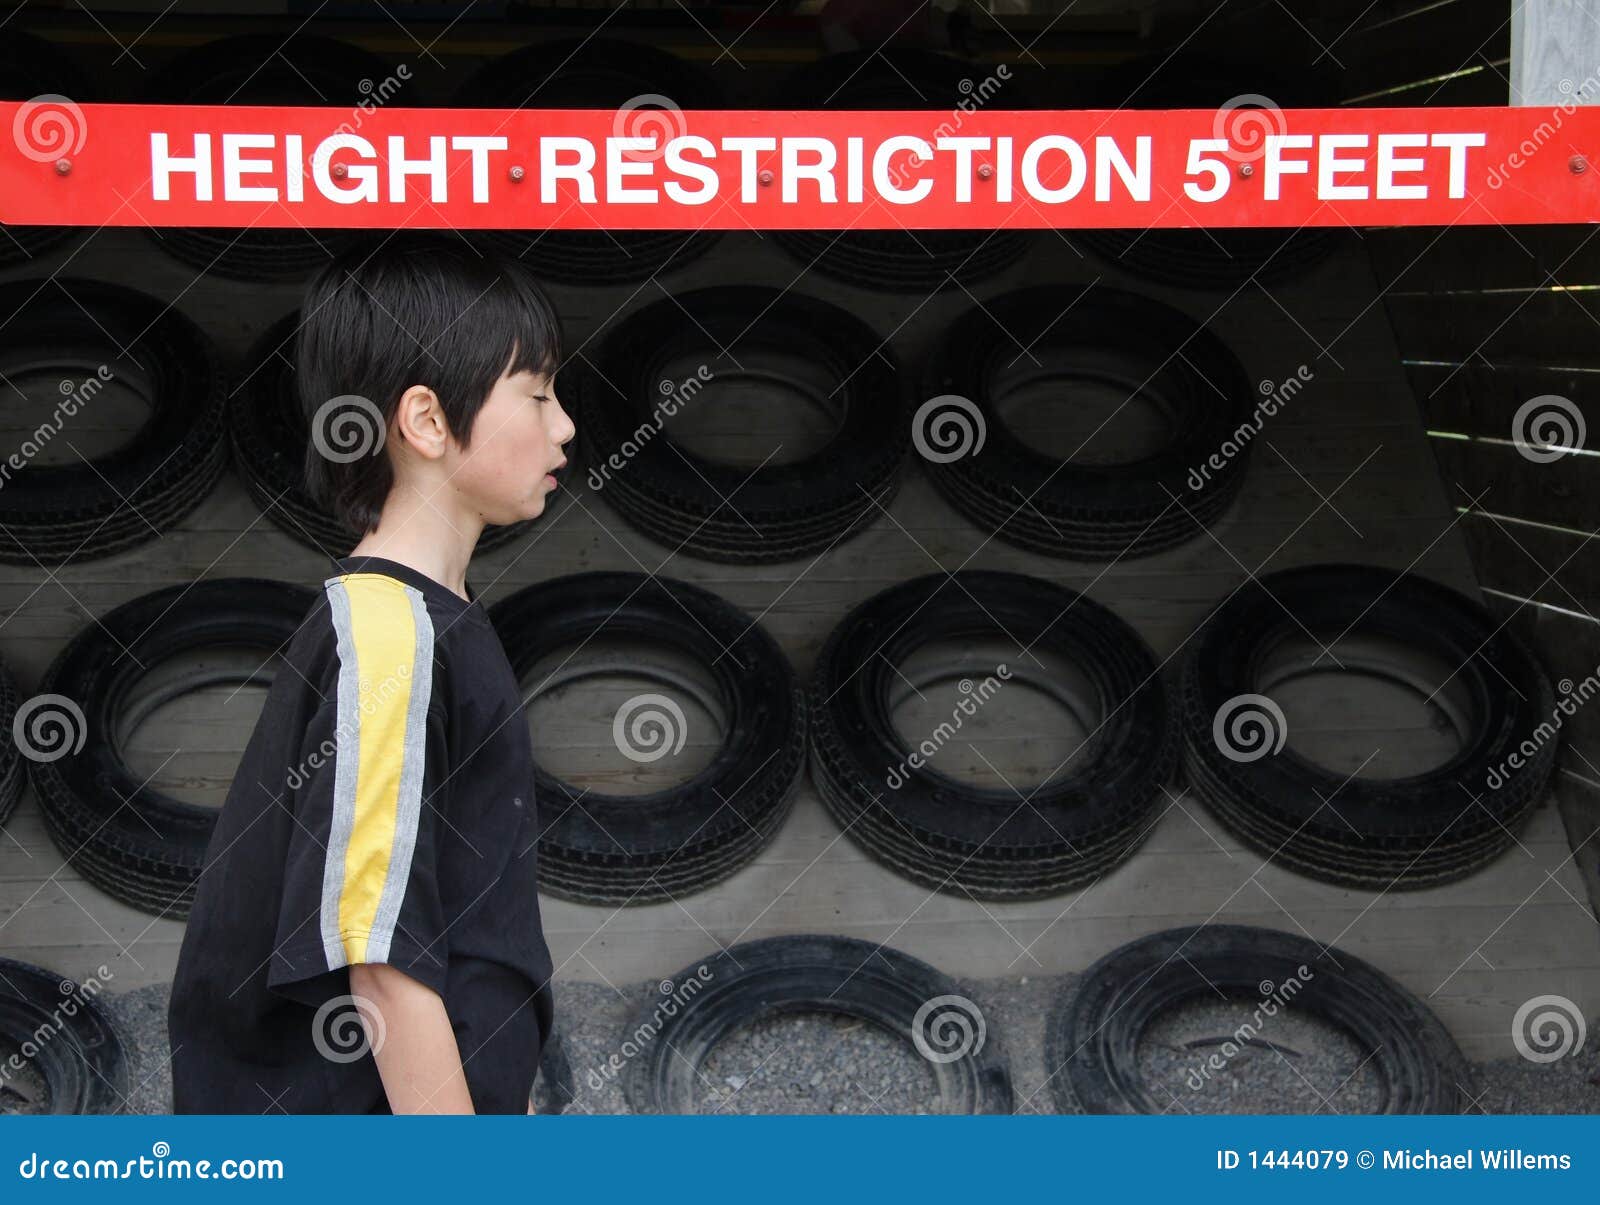 height restriction